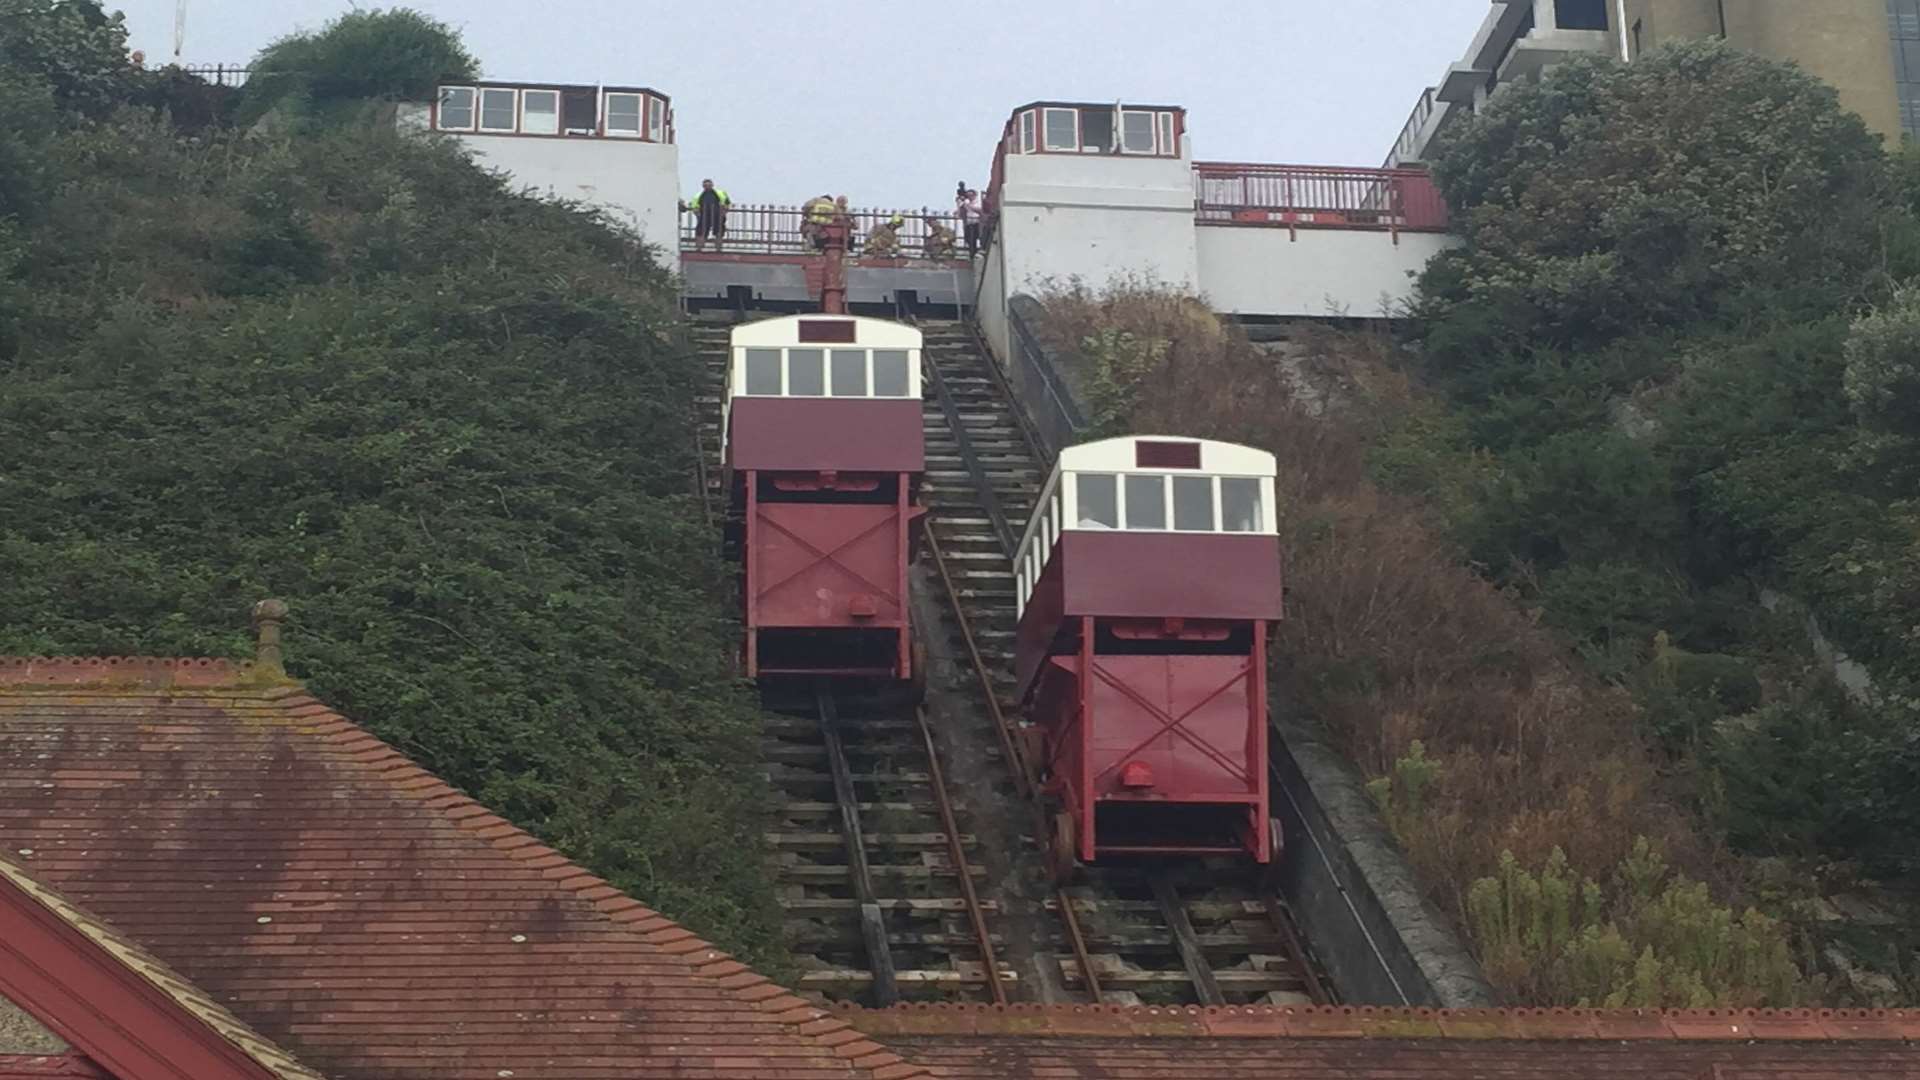 The lifts were positioned in the middle of the track and the firefighters came and rescued people from the top